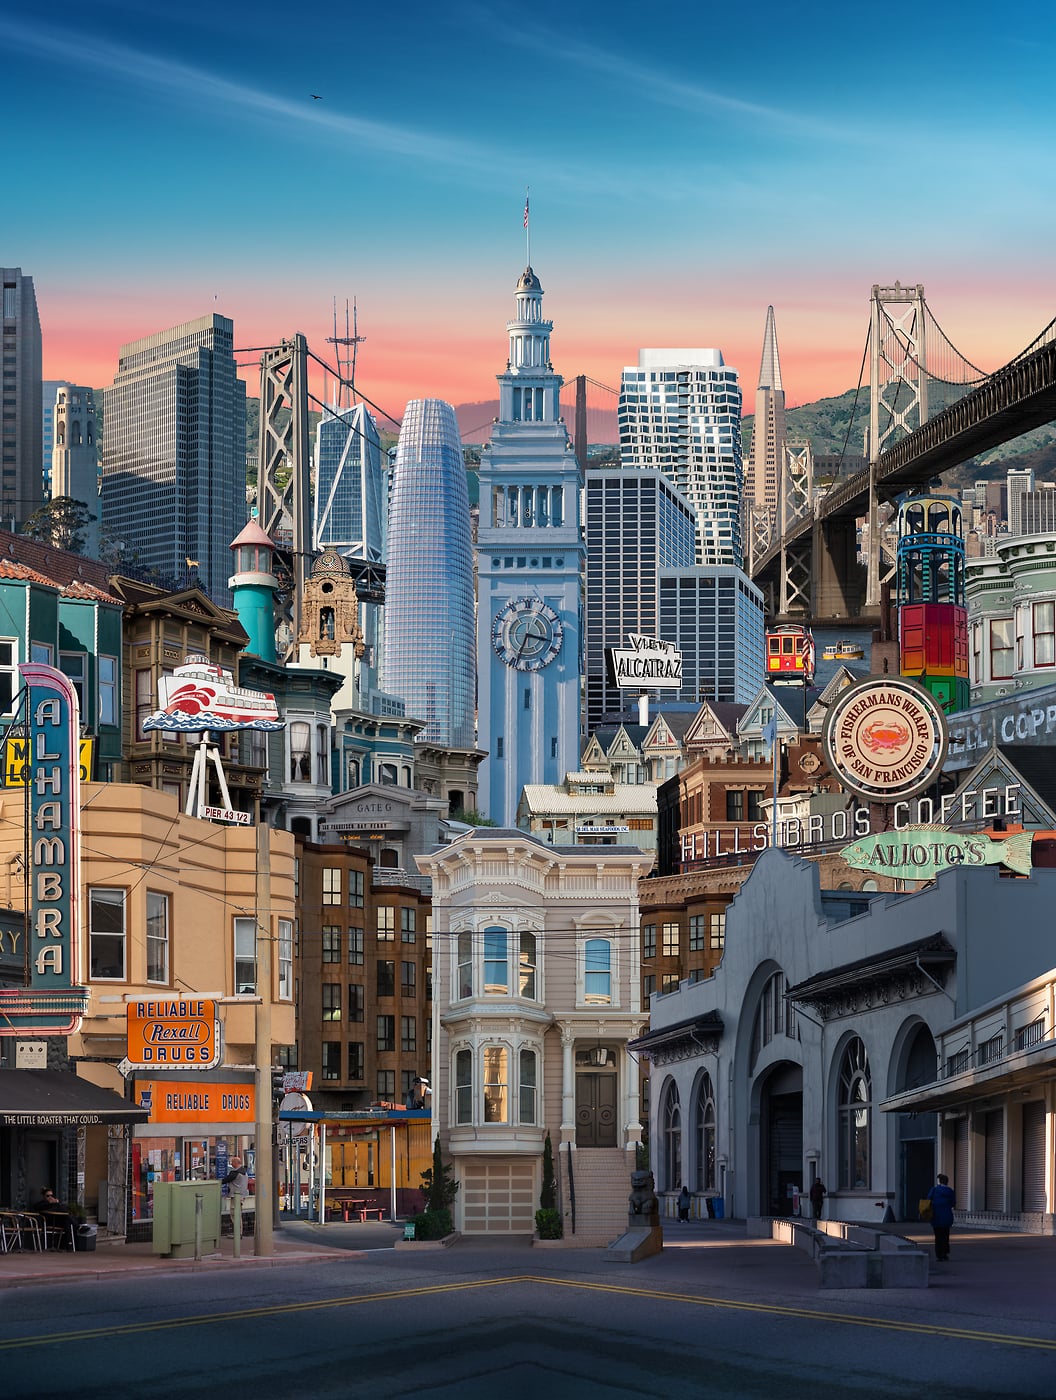 191 megapixels! A very high resolution, big wall art print of scenes from San Francisco; artistic collage photograph created by Andrew Soria.